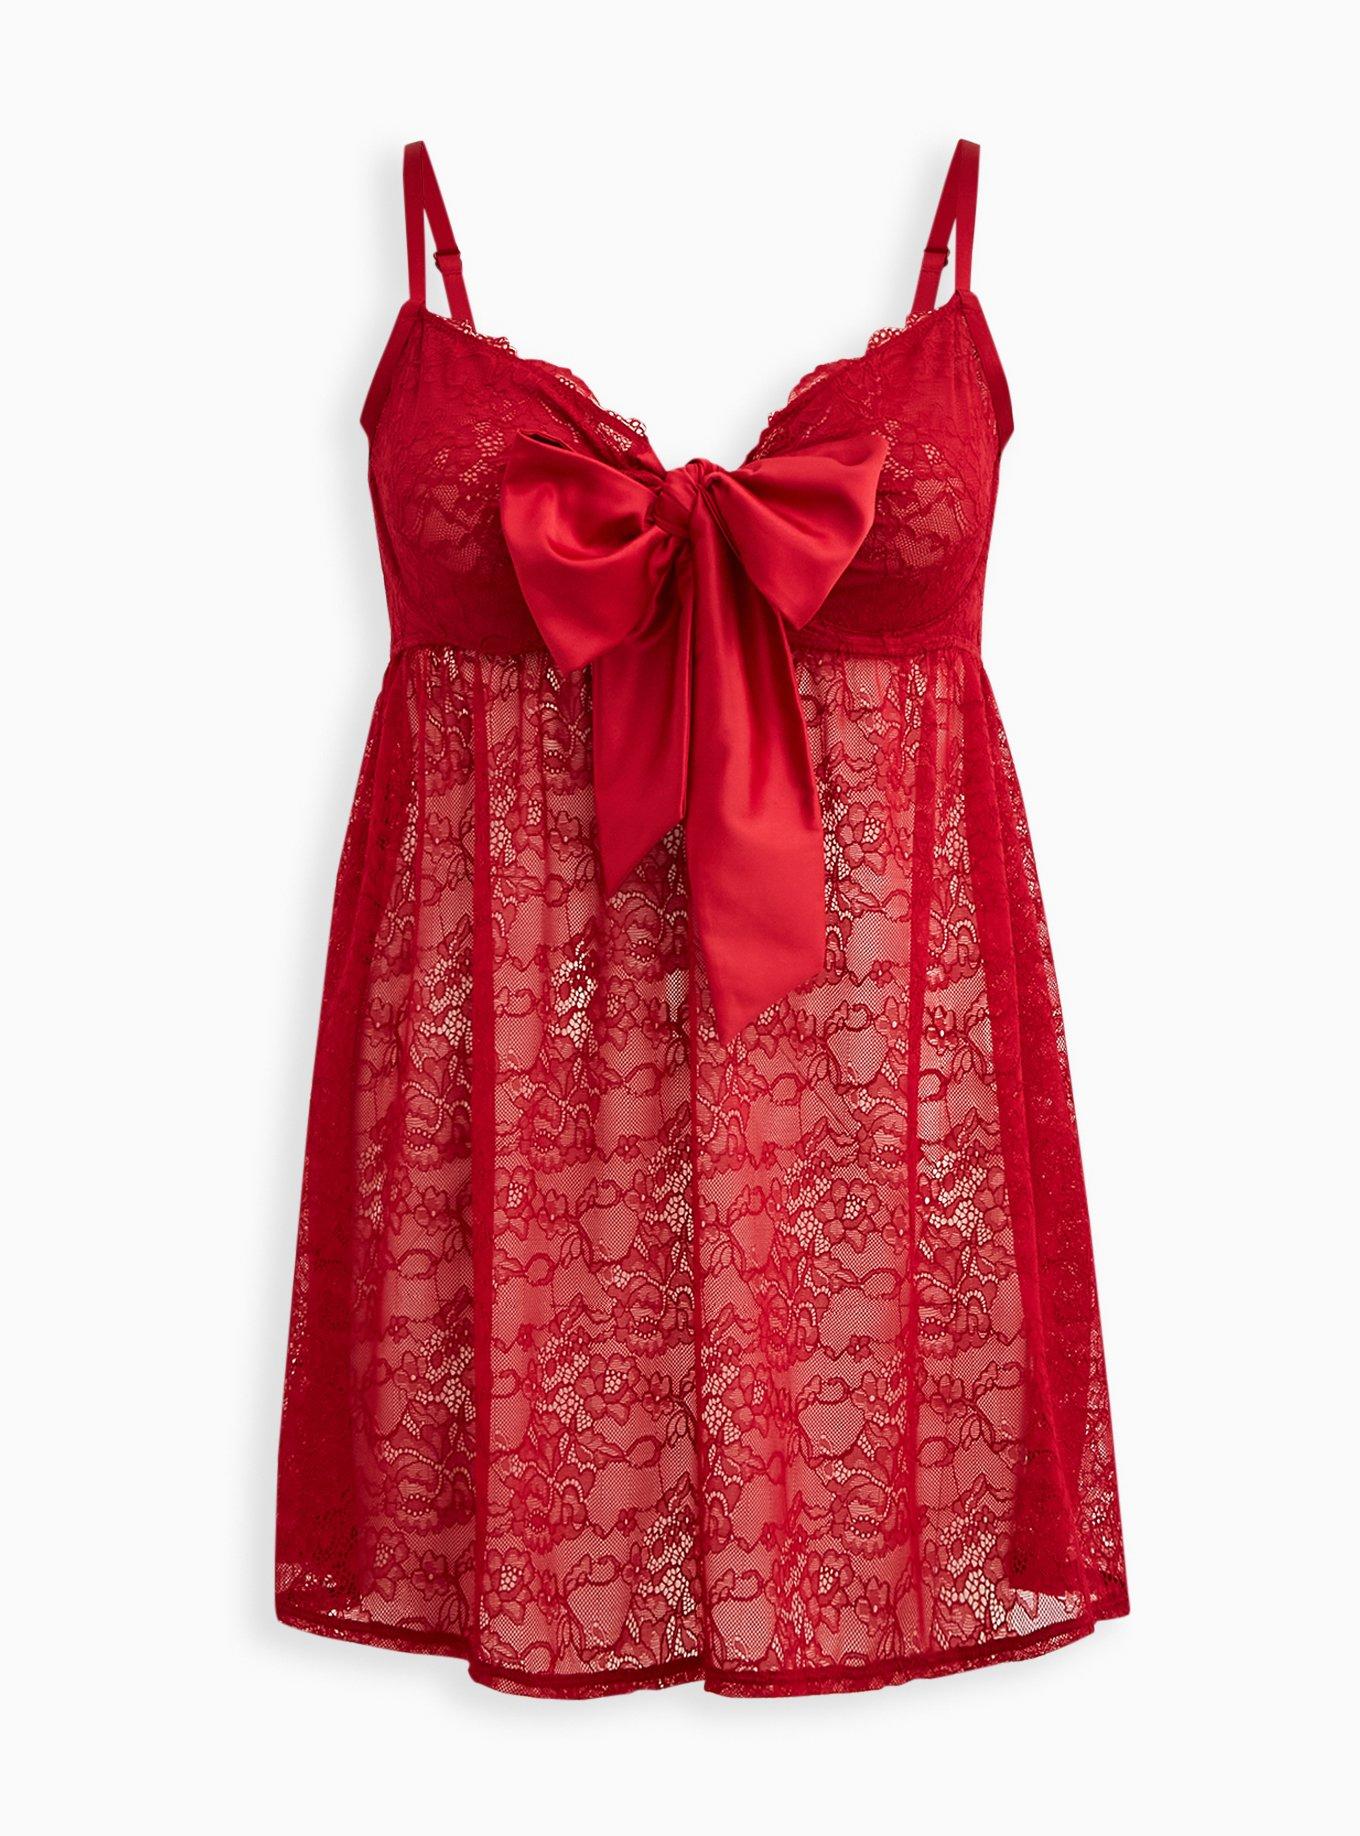 Plus Size - Underwire Babydoll Top - Lace & Bow Red - Torrid